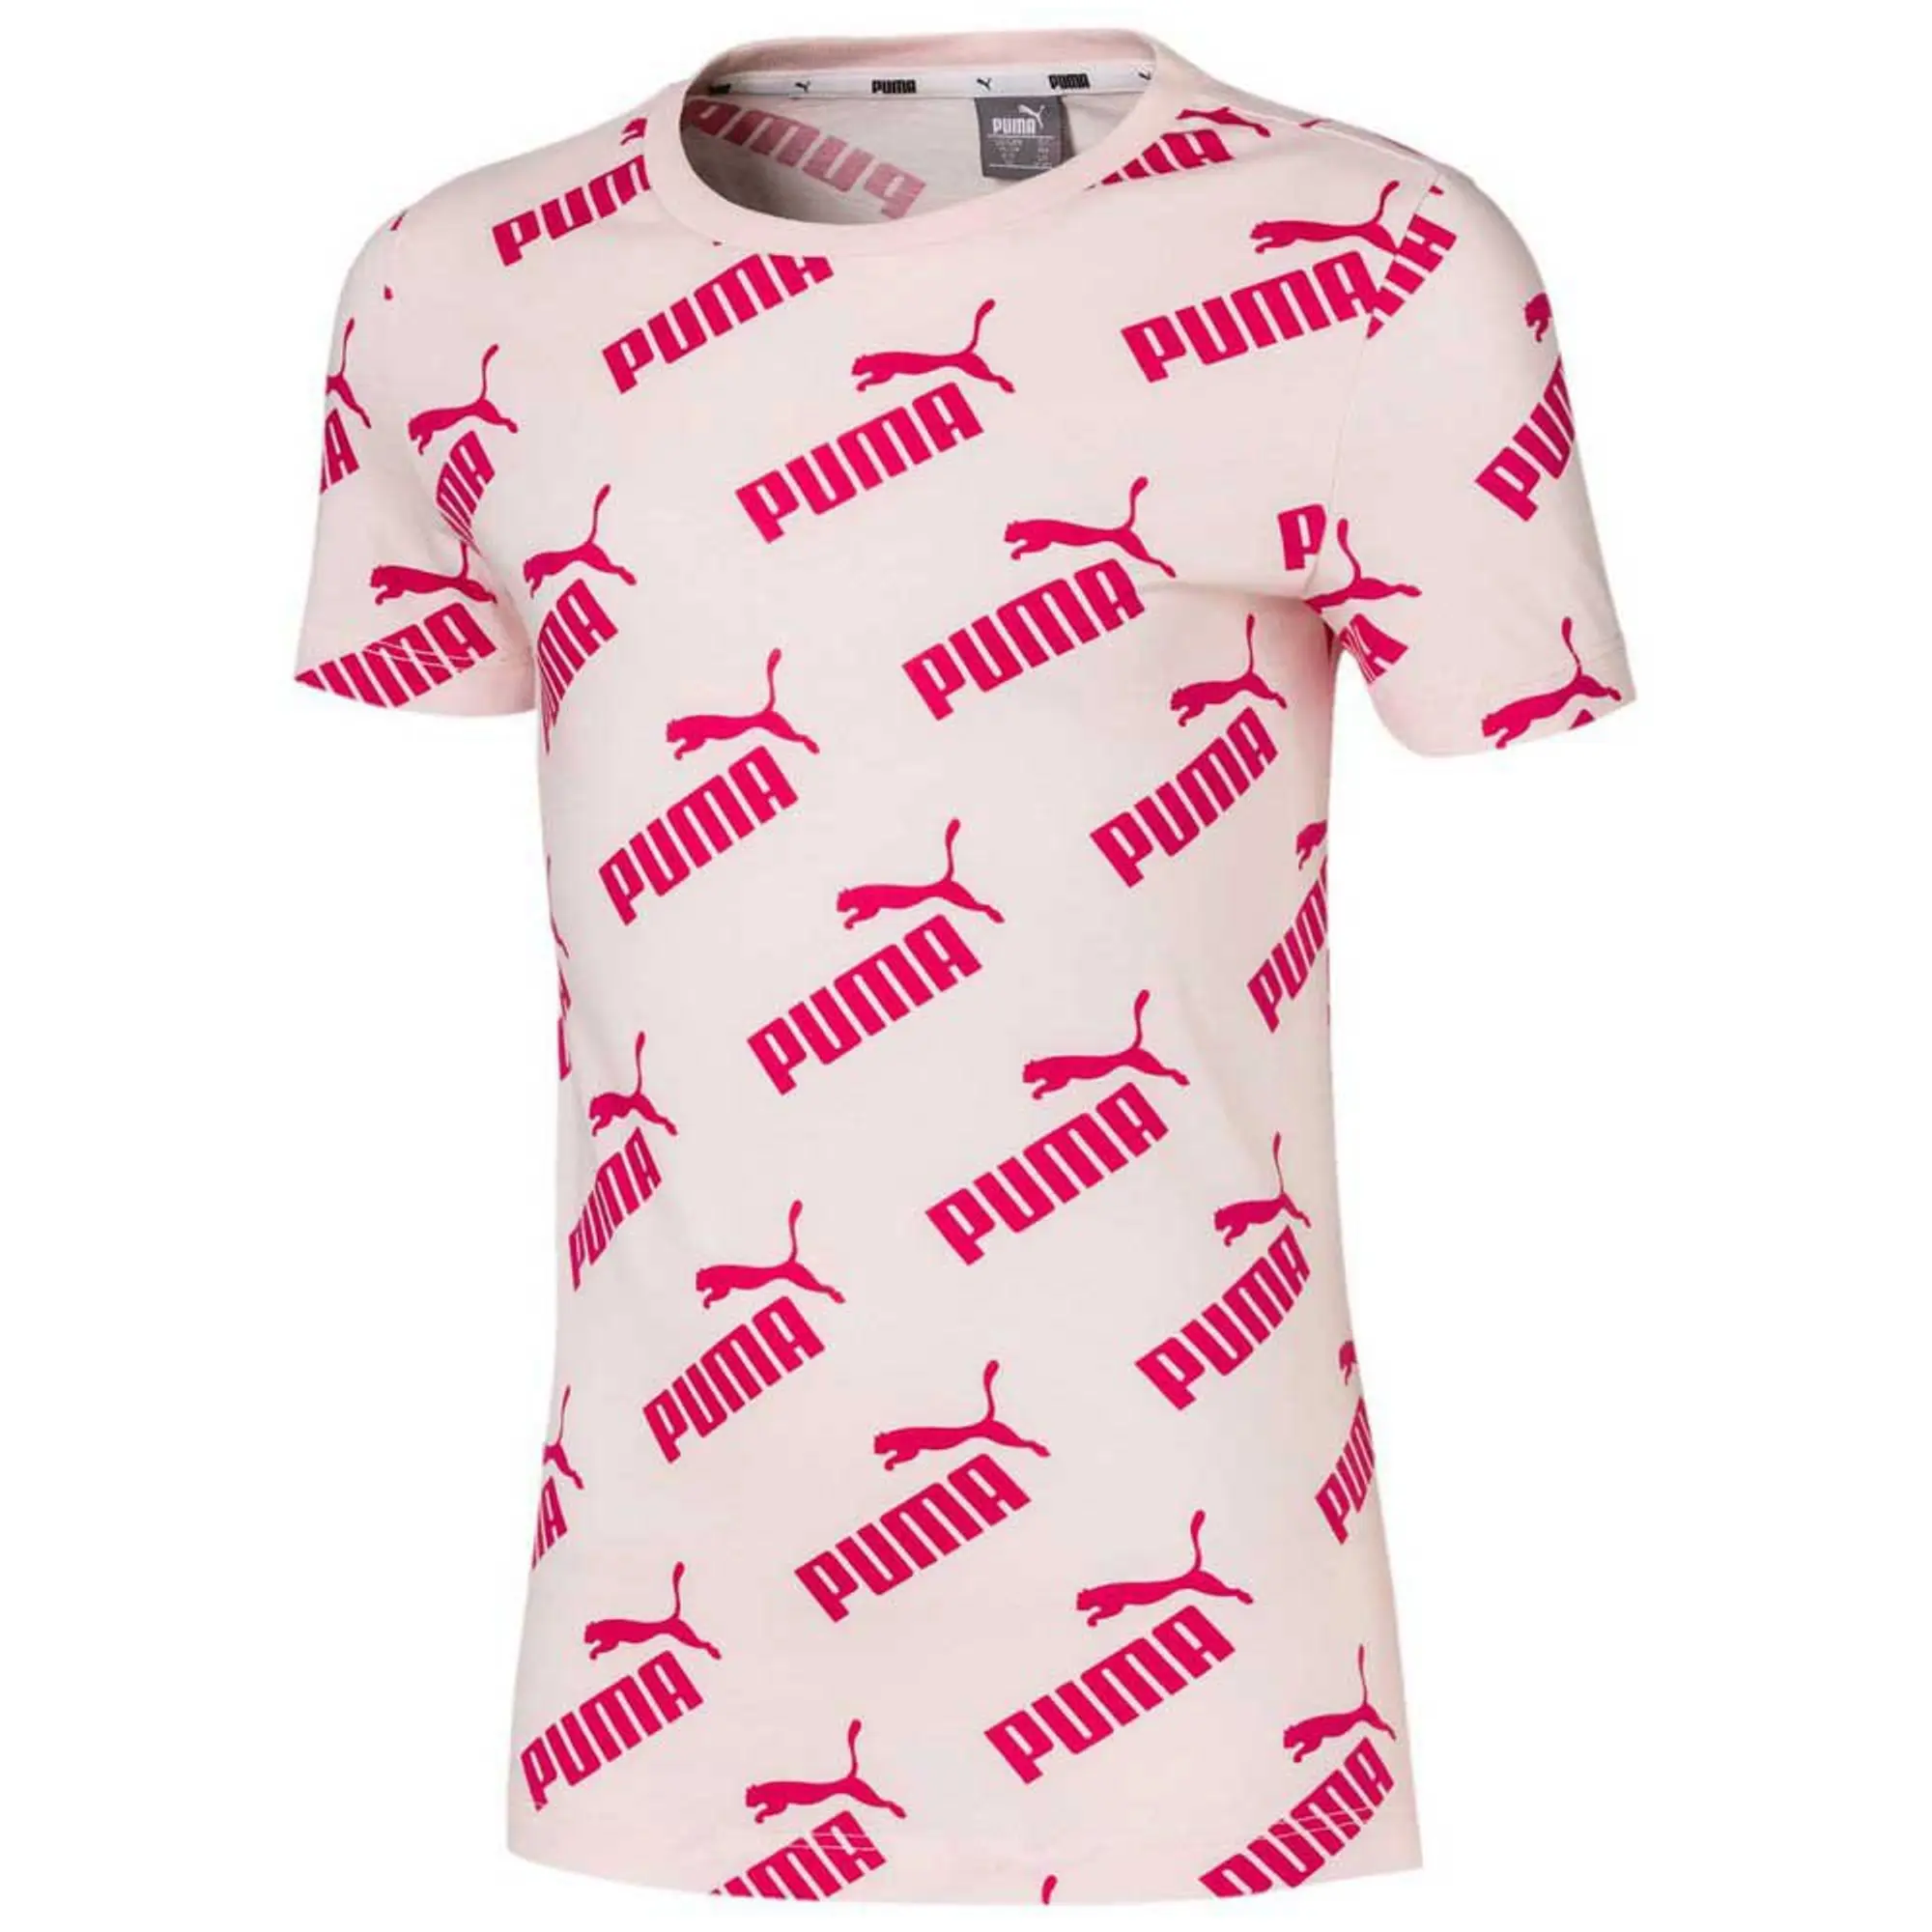 Puma Amplified All Over Print Short Sleeve T-shirt  - Pink